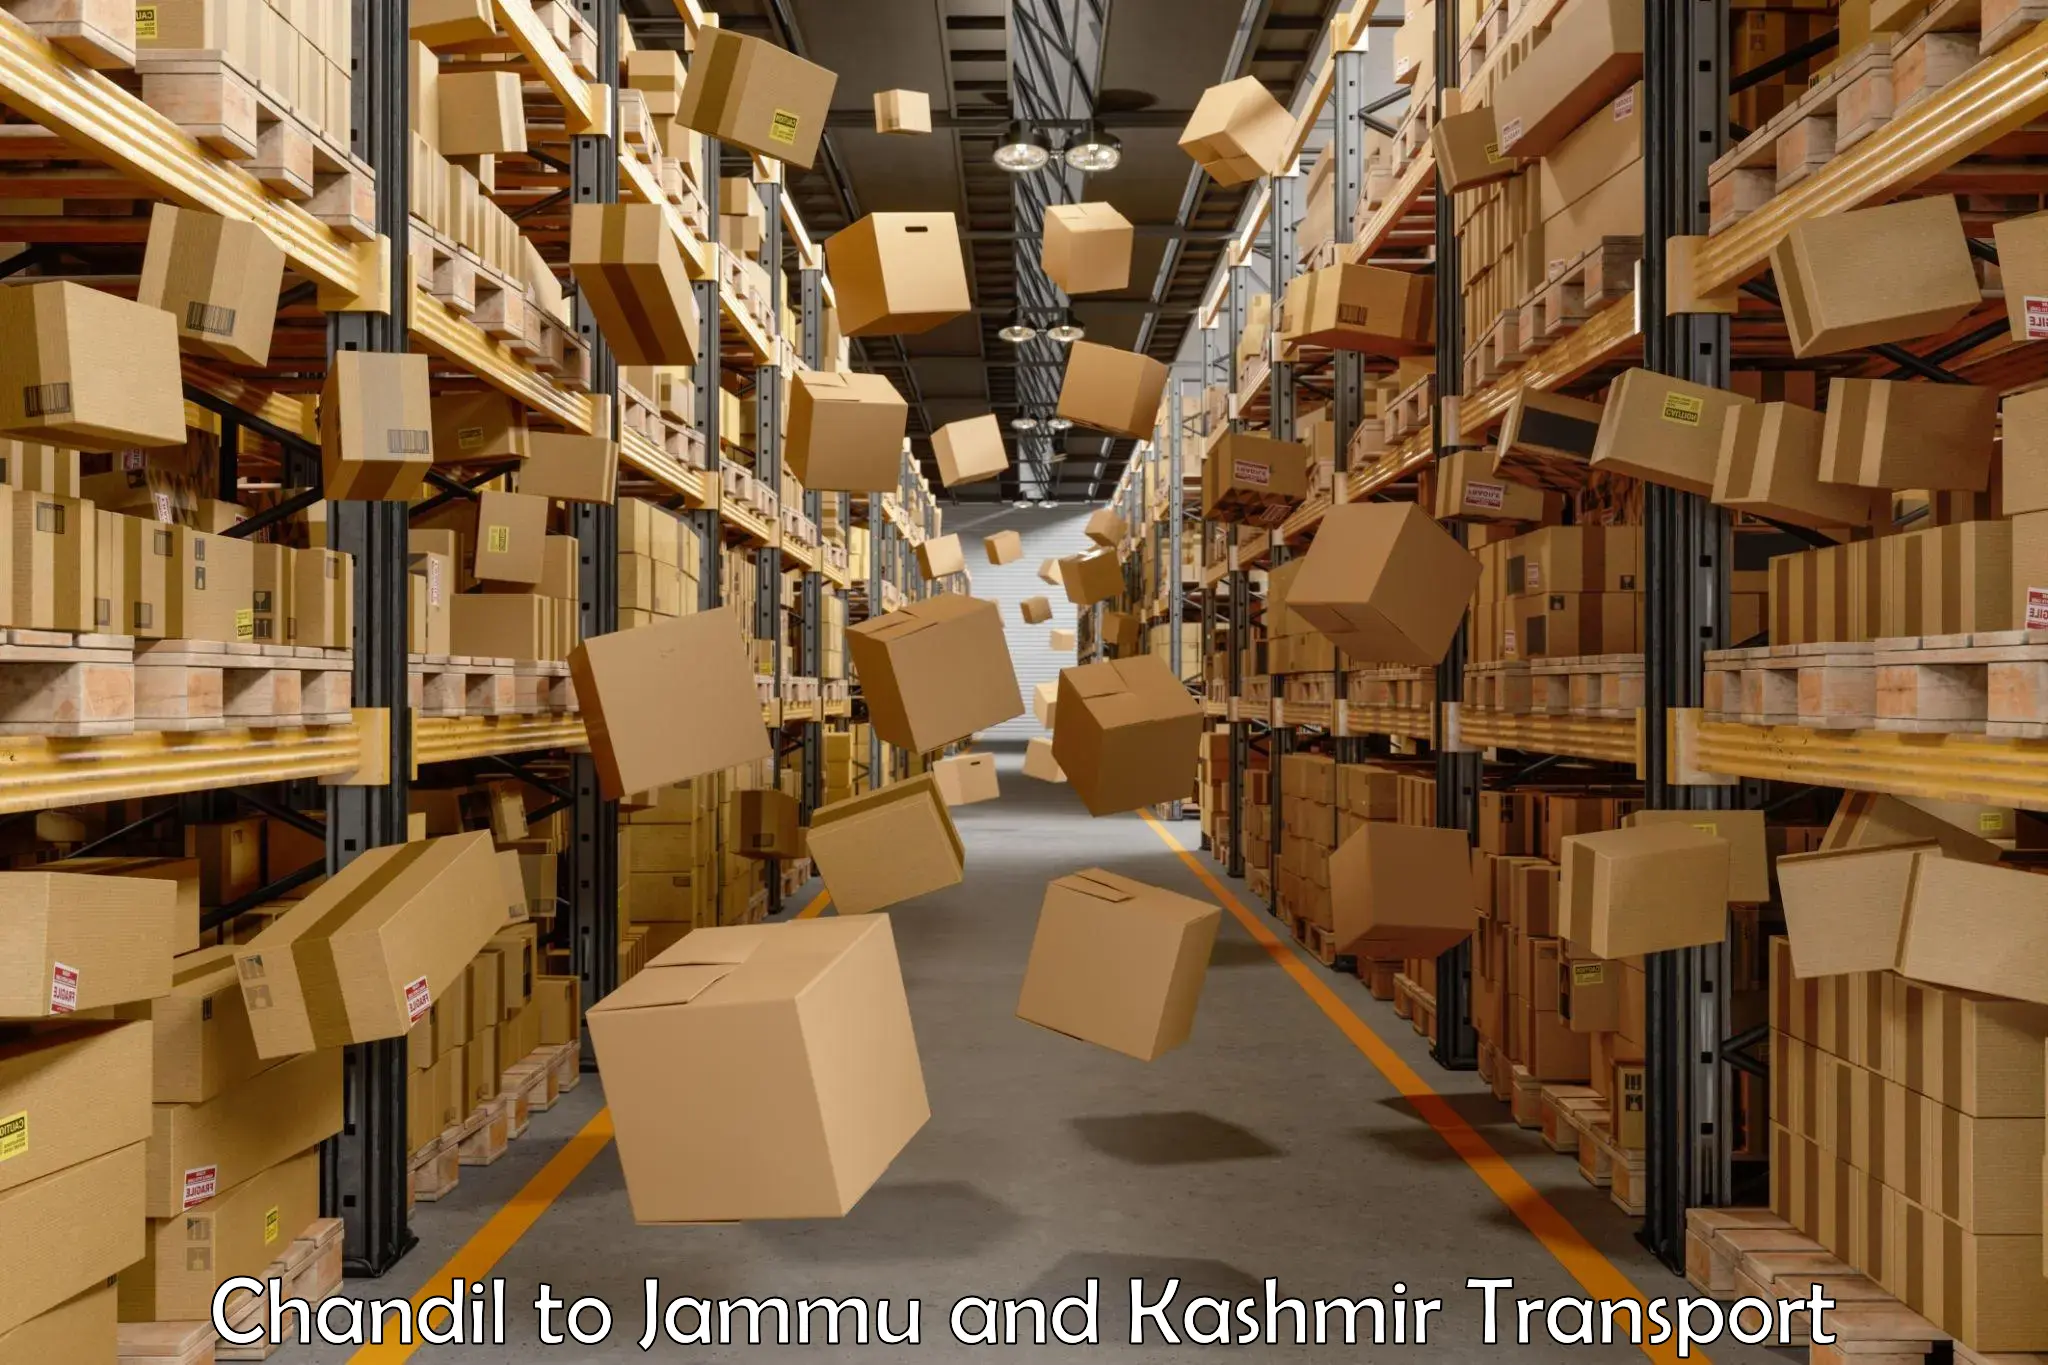 Transport in sharing Chandil to Jammu and Kashmir